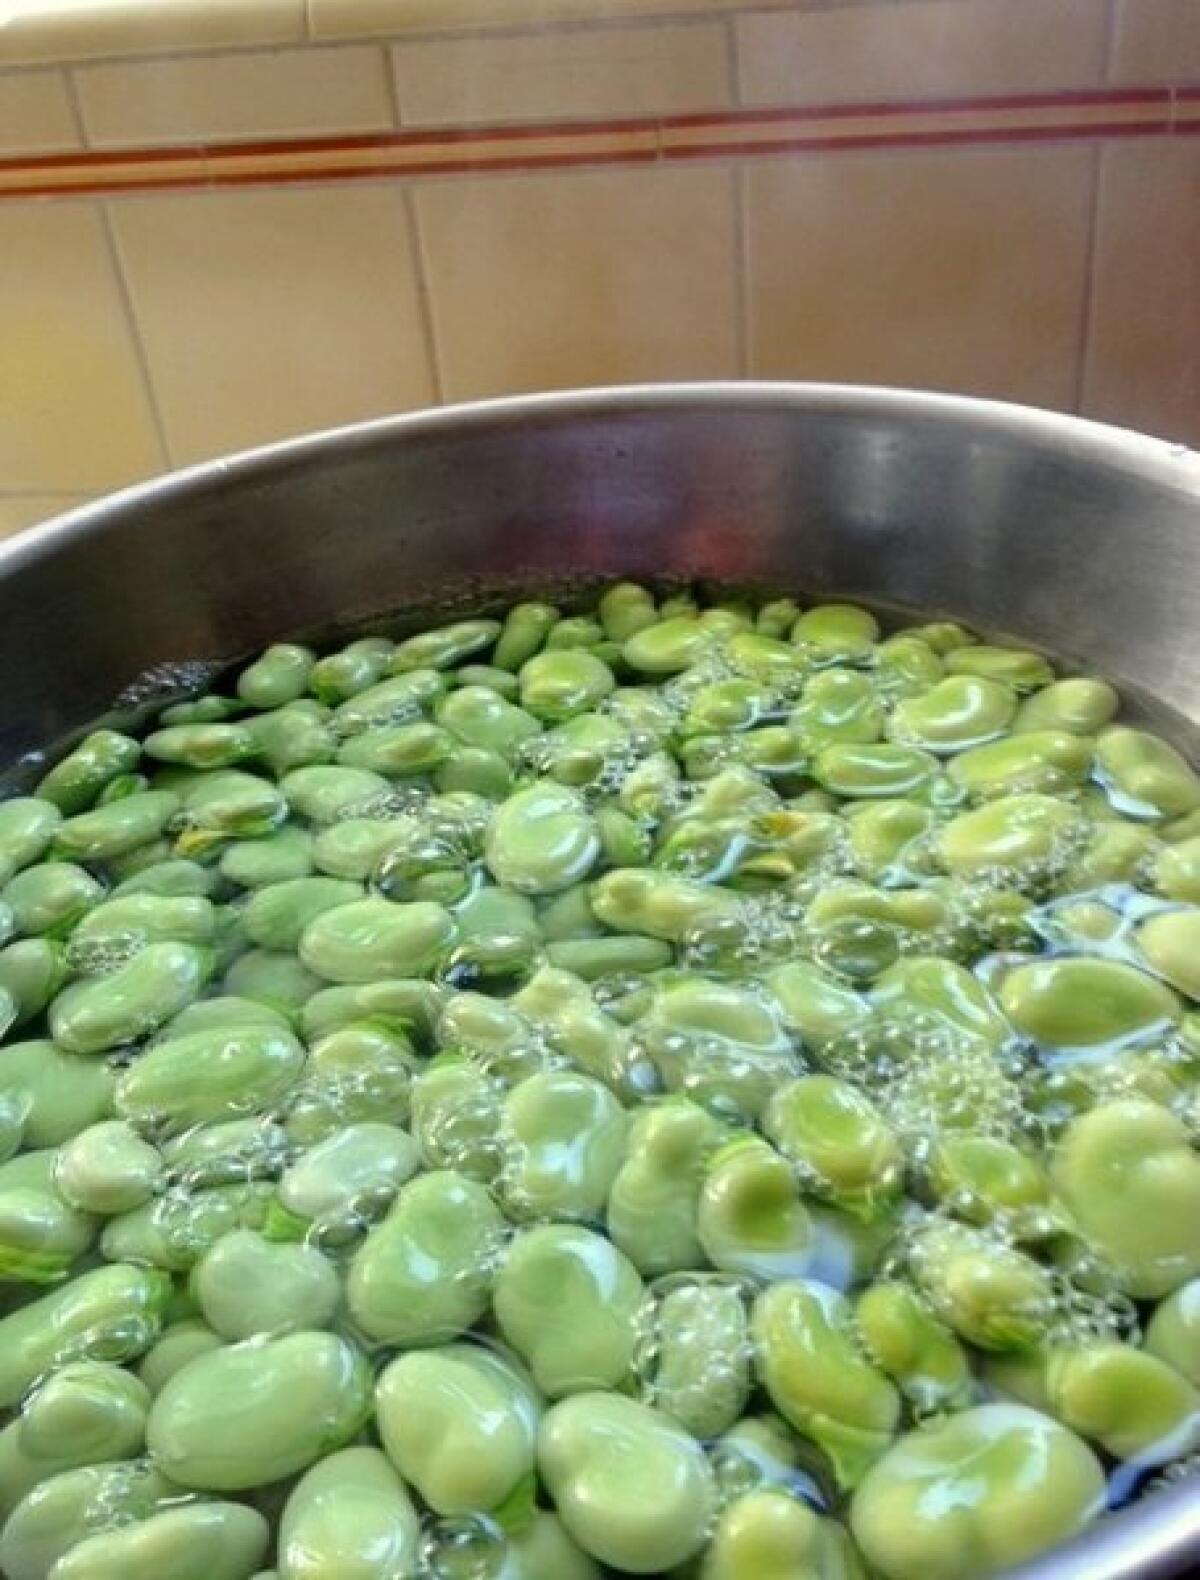 Fava beans, freshly shelled and ready to be peeled.